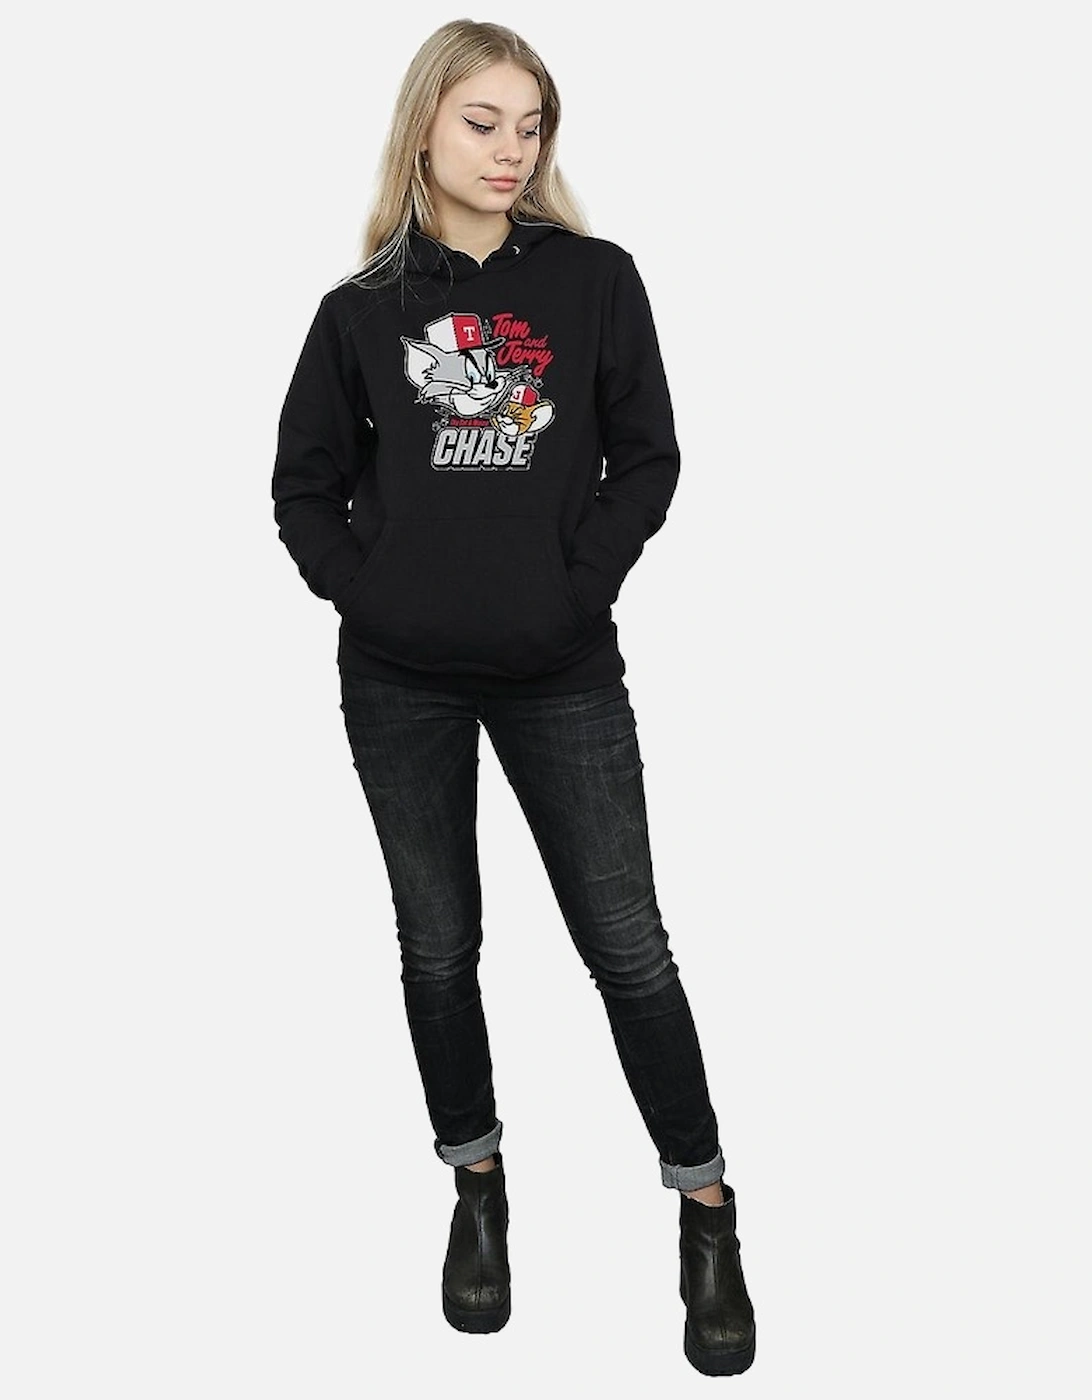 Tom and Jerry Womens/Ladies Cat & Mouse Chase Hoodie